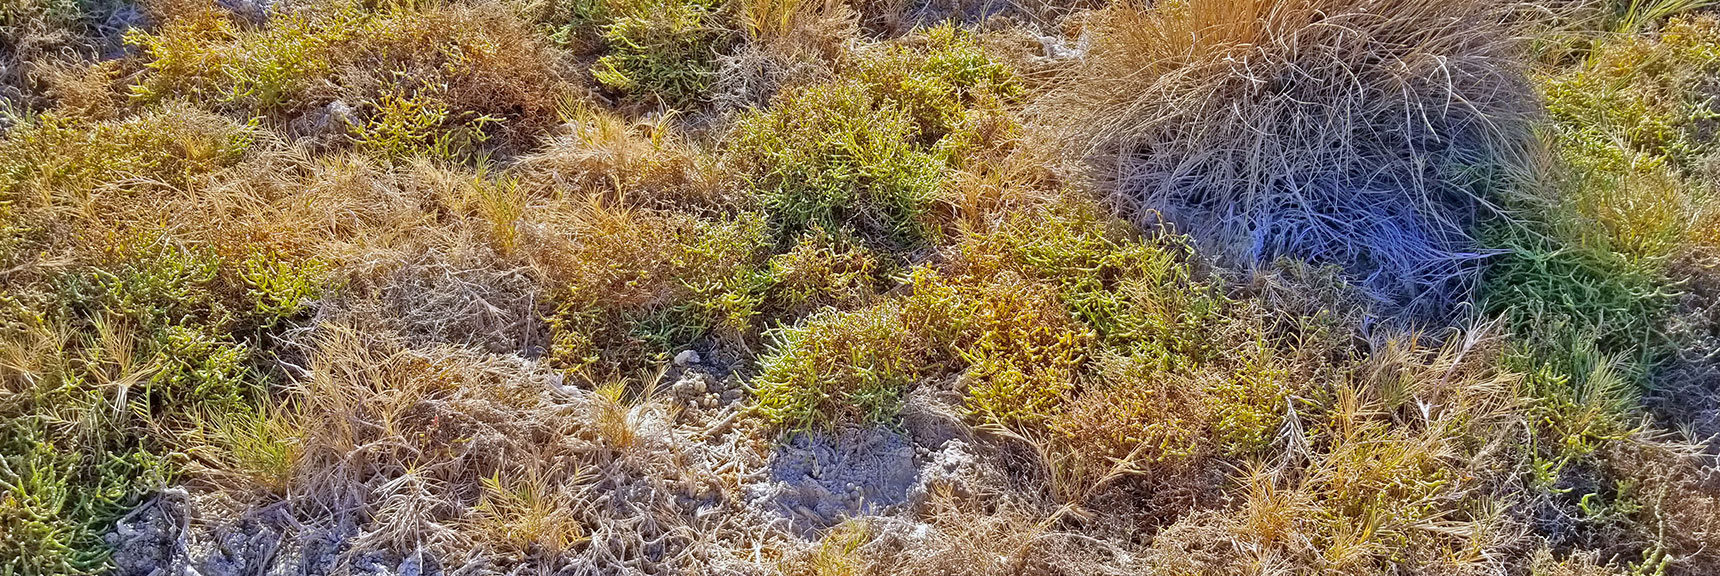 Pickle Weed Growing Amongst Clumps of Salt Grass | Return of Lake Manly (Lake in Death Valley) | Death Valley National Park, California